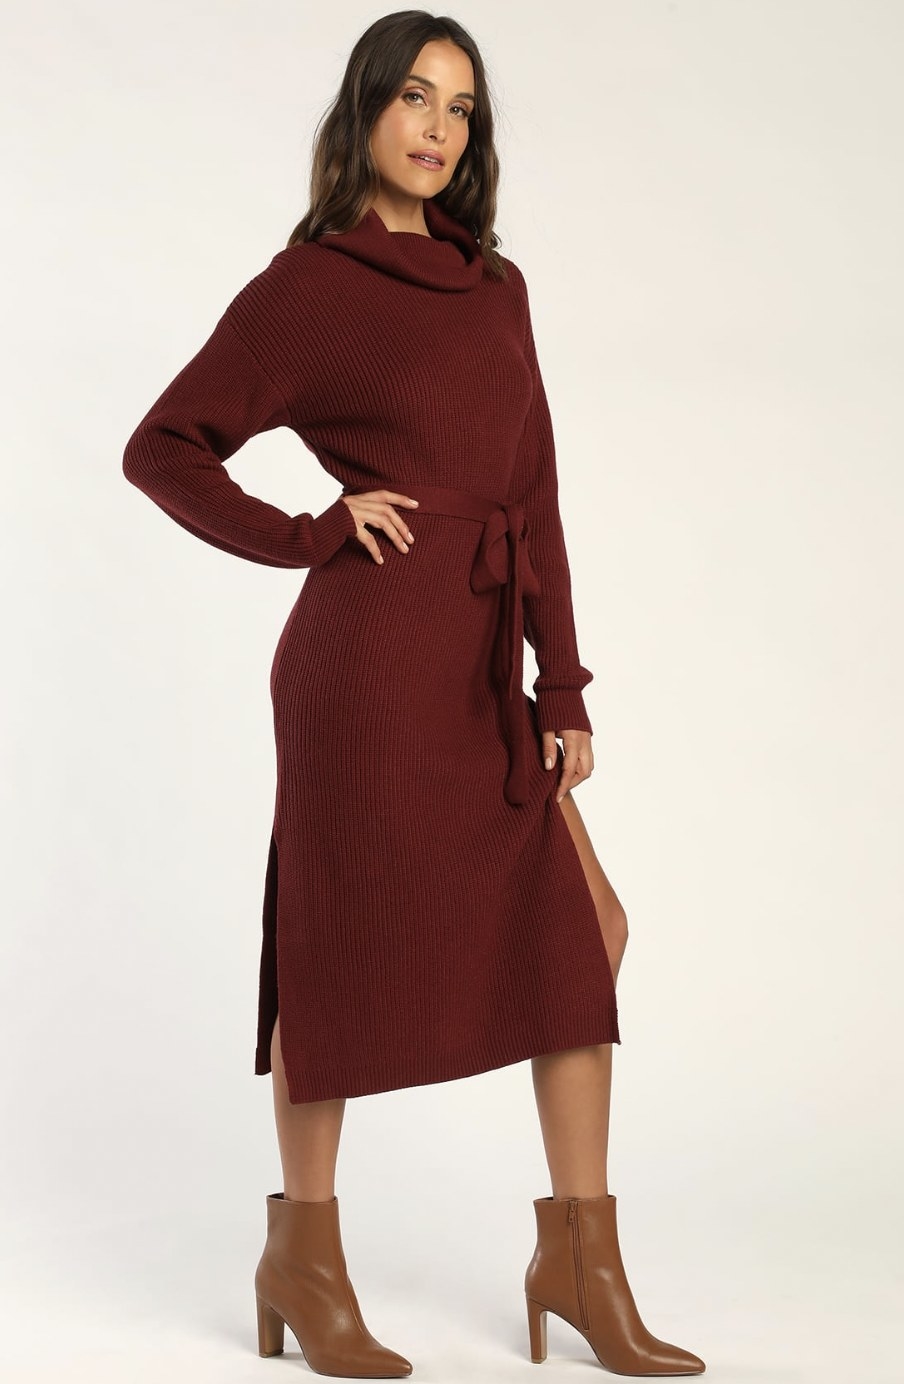 Model standing in the burgundy dress with brown ankle boots